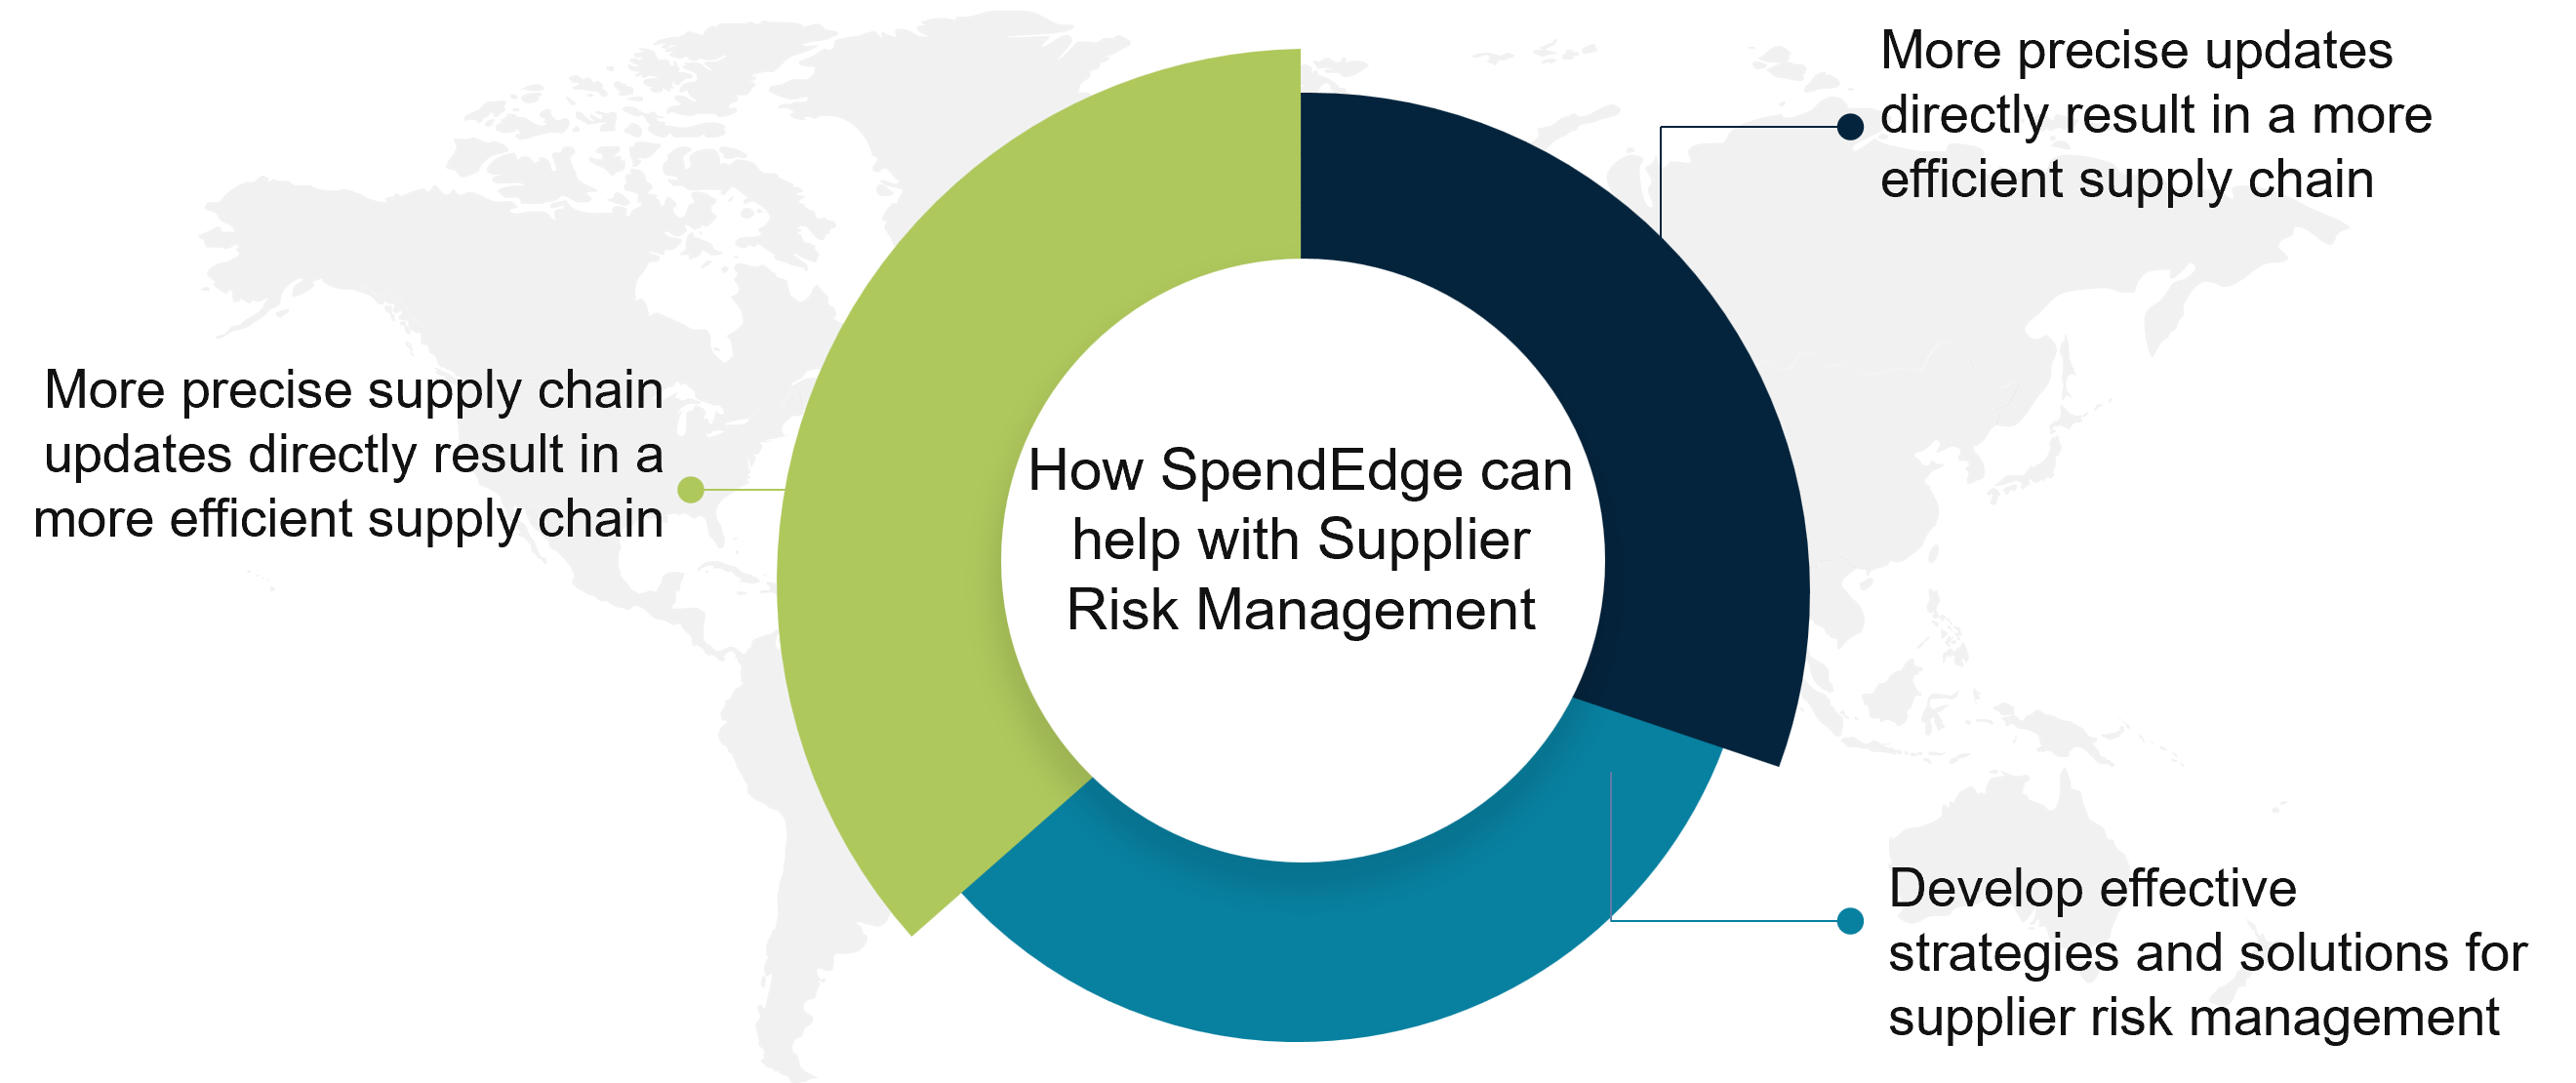 How SpendEdge can help with Supplier Risk Management